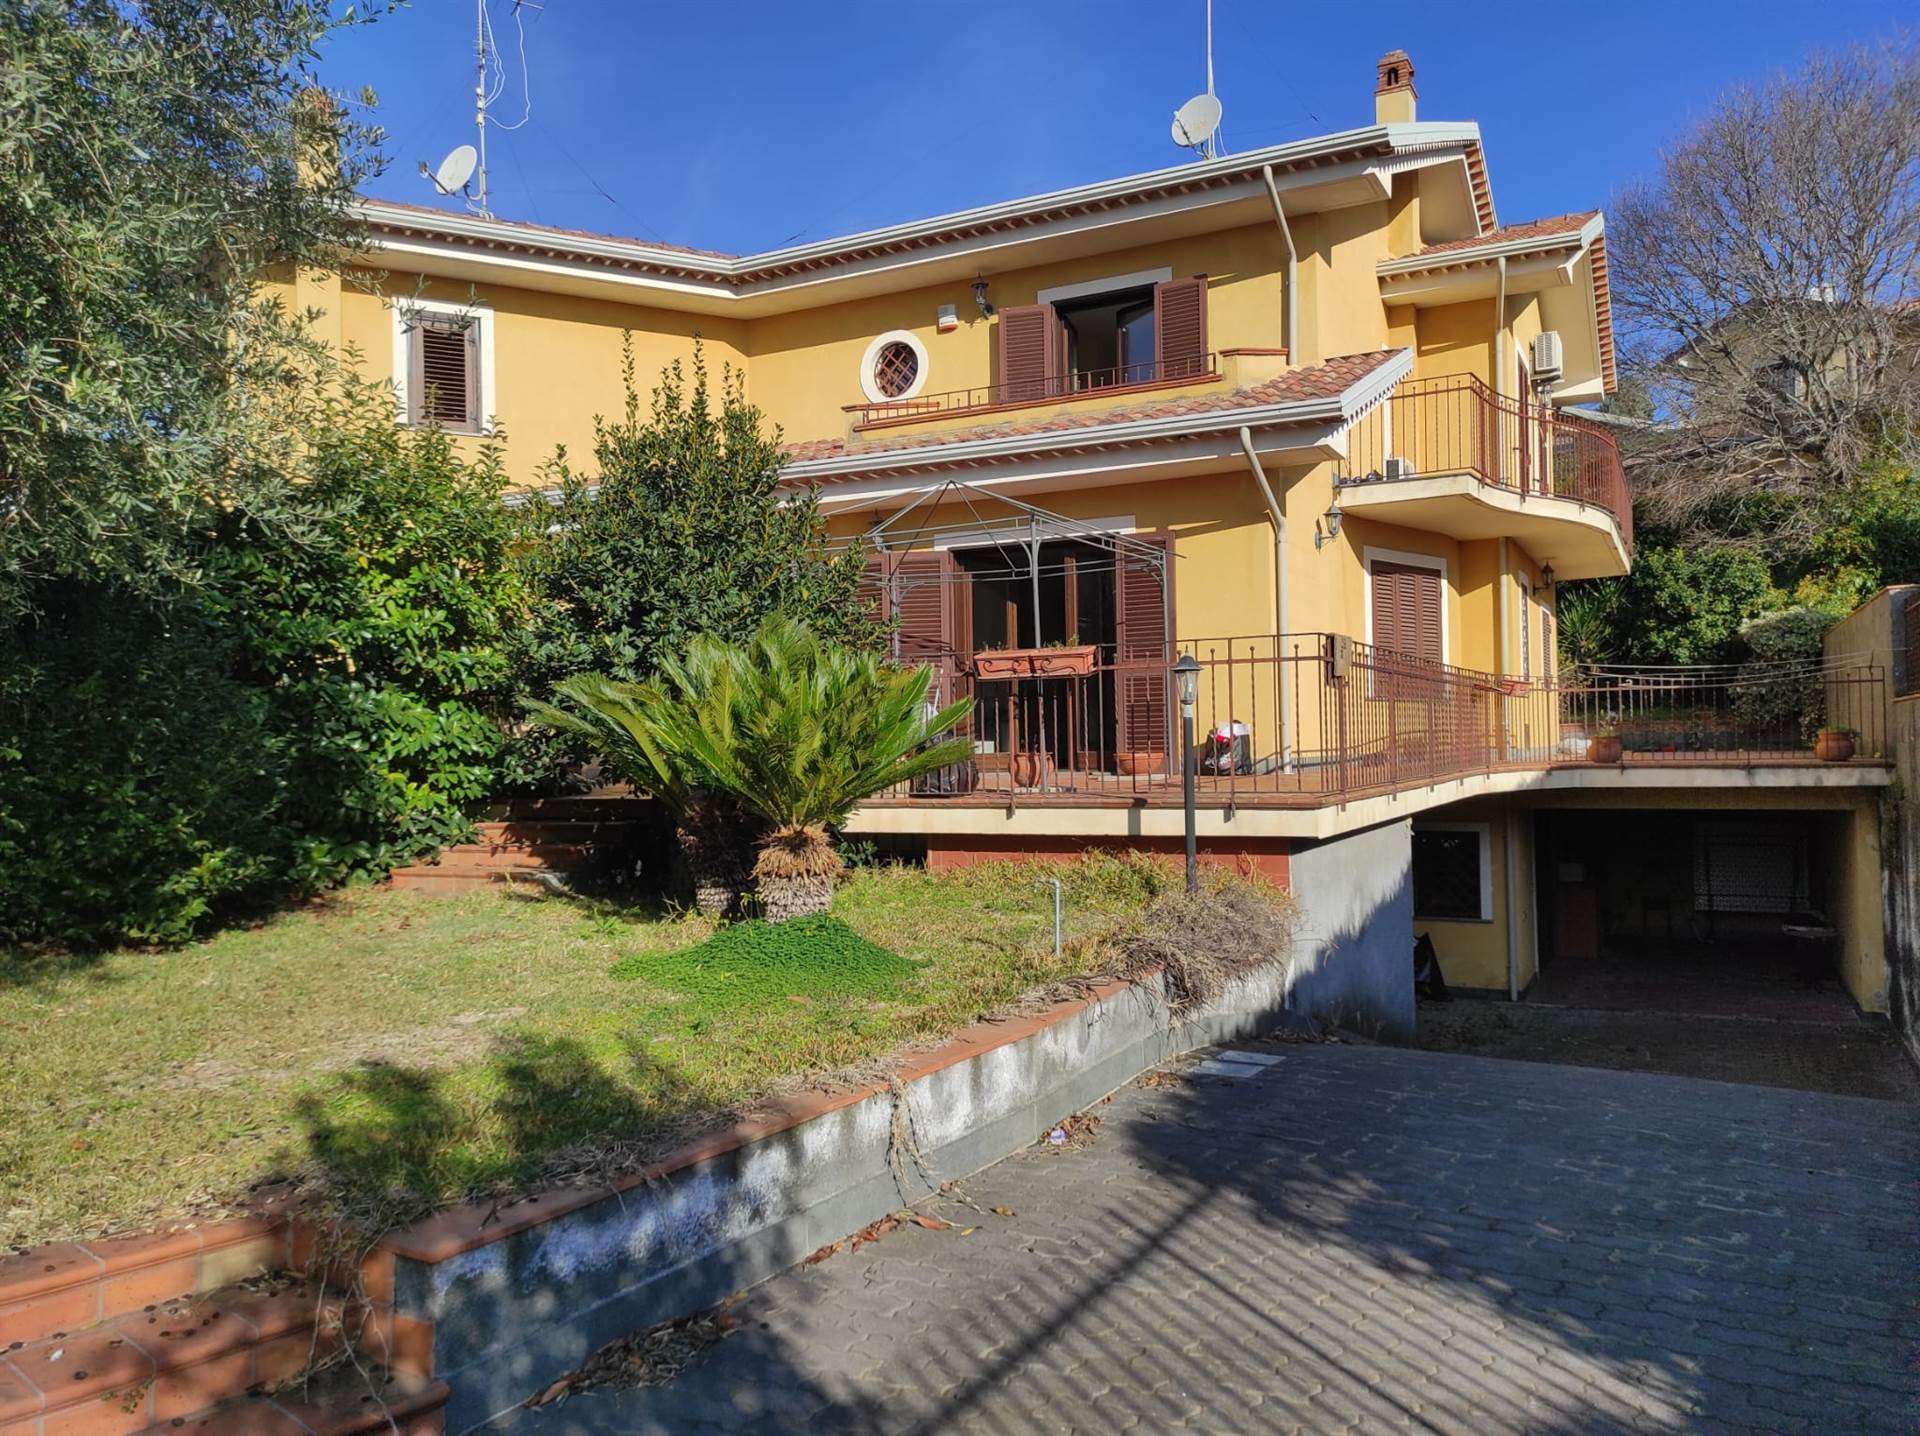 TRECASTAGNI, Villa for sale of 215 Sq. mt., Excellent Condition, Heating Individual heating system, Energetic class: G, Epi: 125 kwh/m2 year, placed 